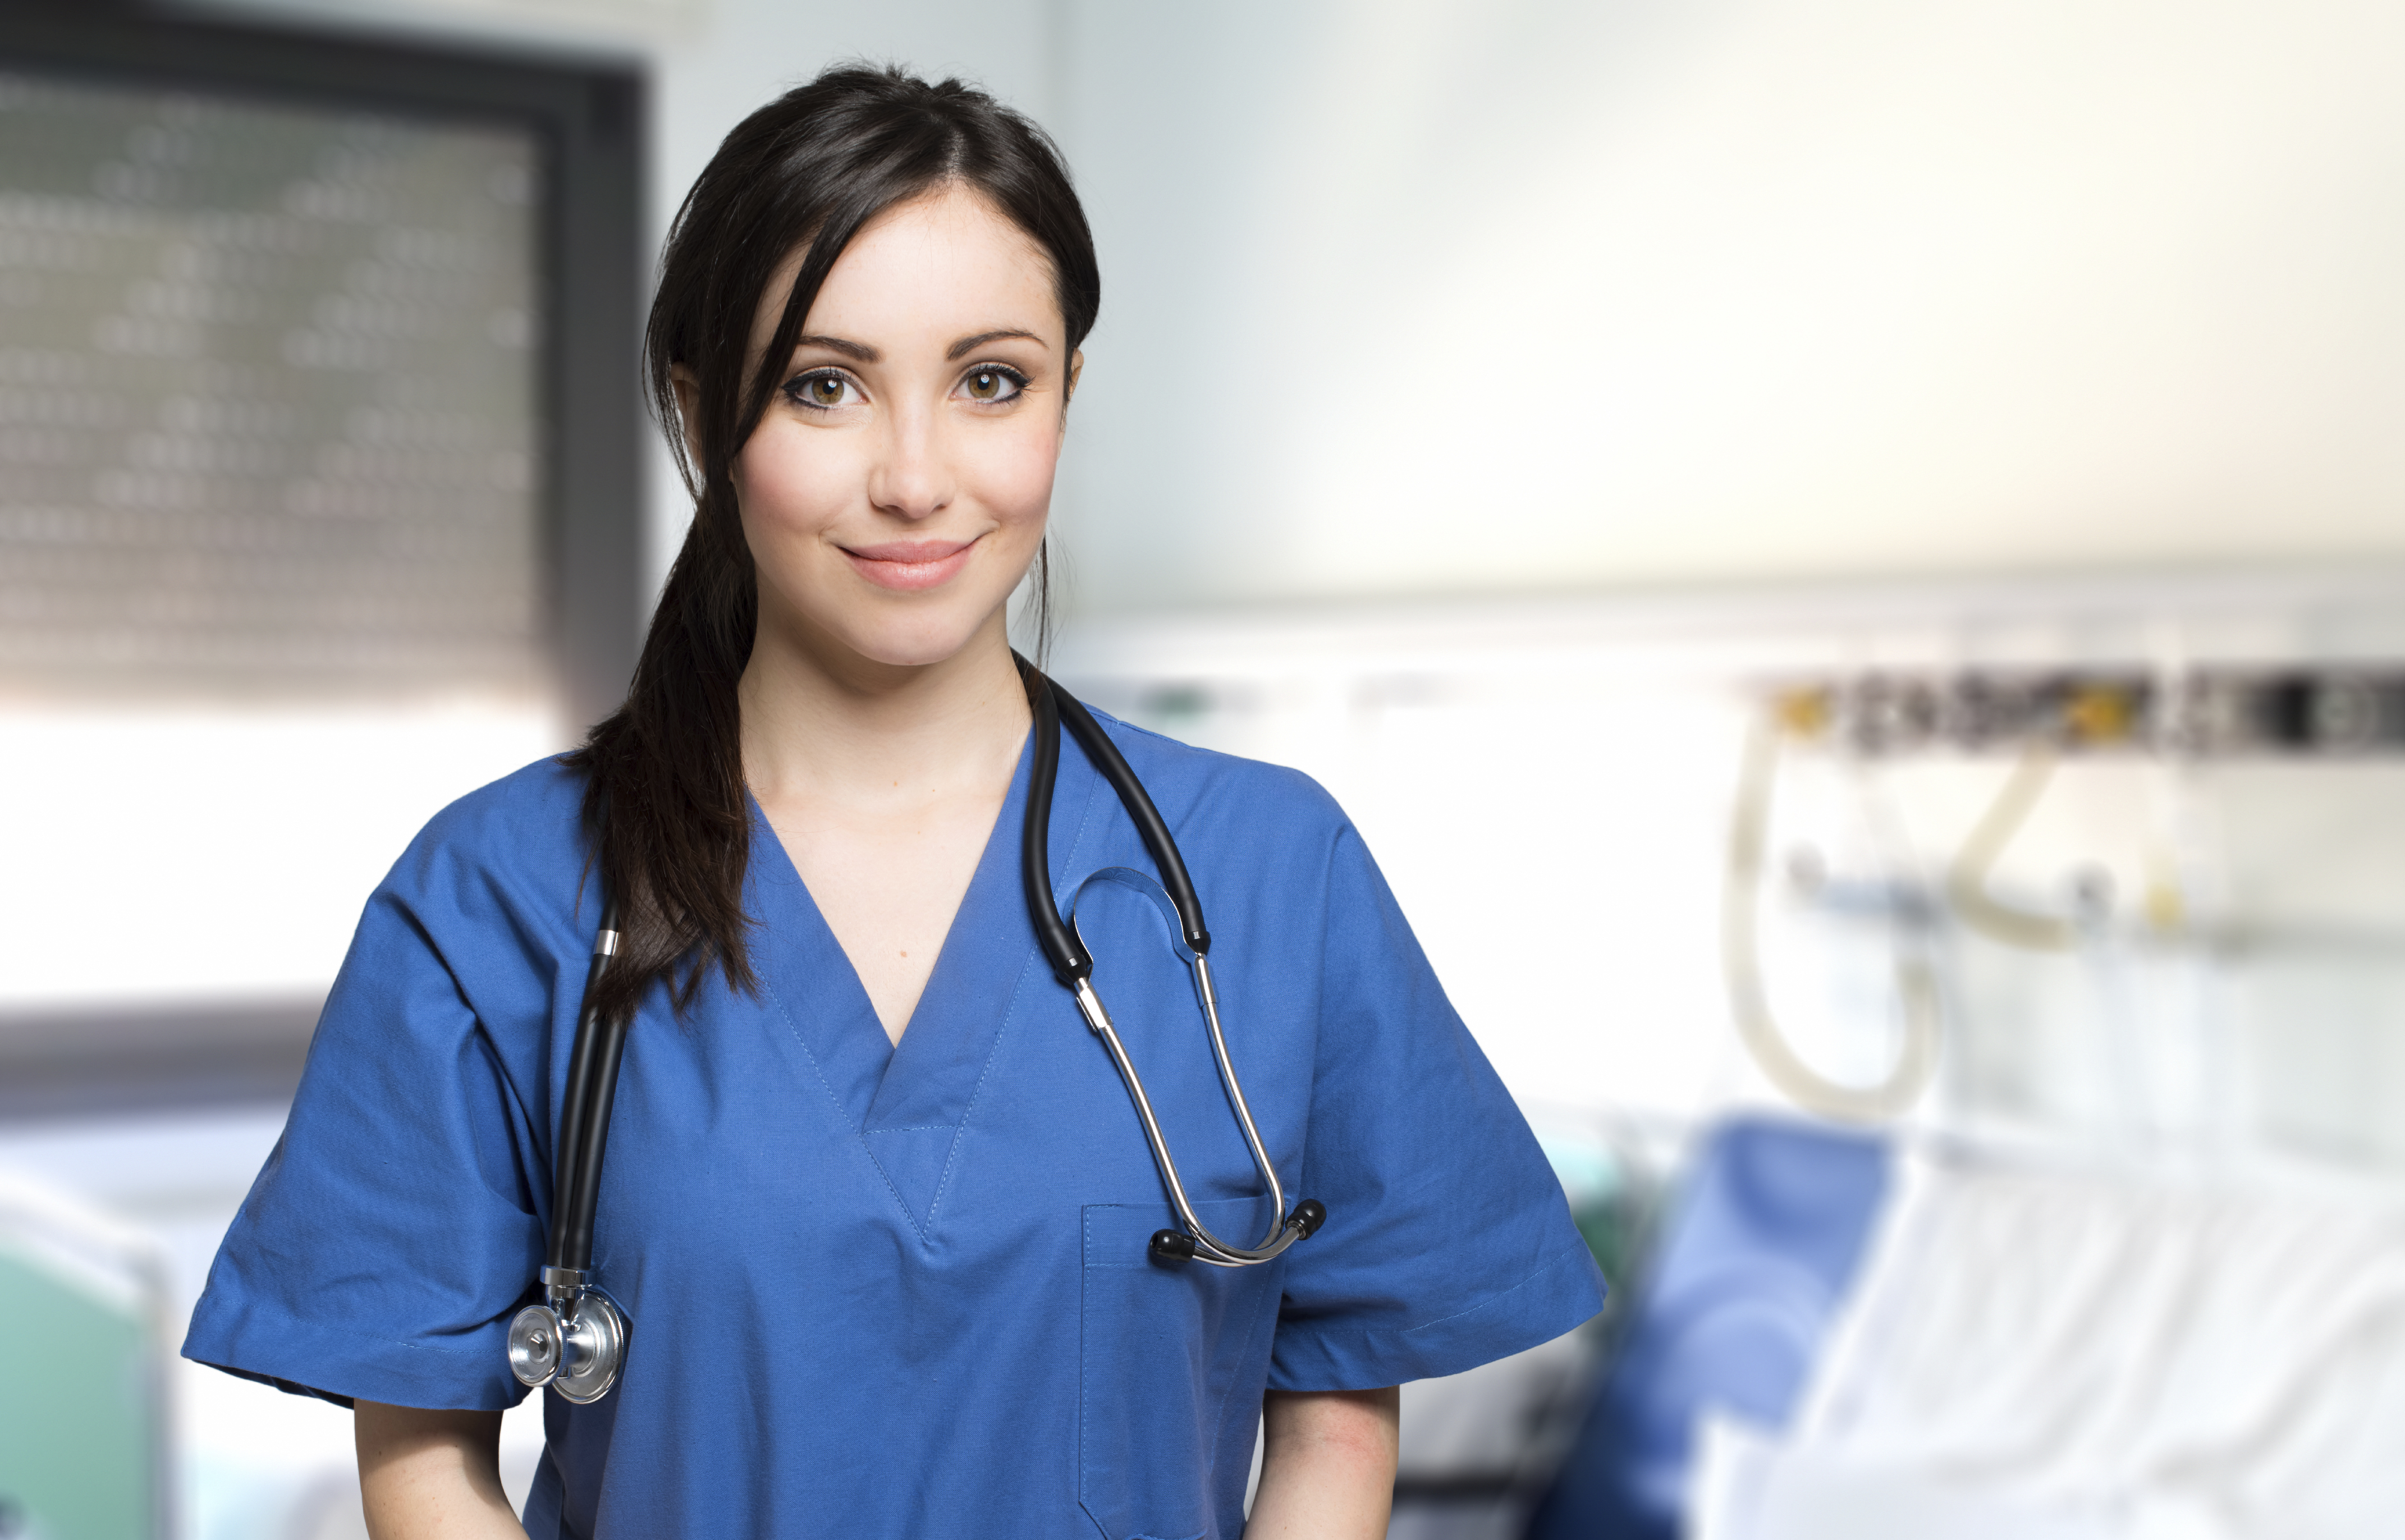 Millenia Medical Staffing 888-686-6877 Offers Great Pay and Benefits to Traveling RNs